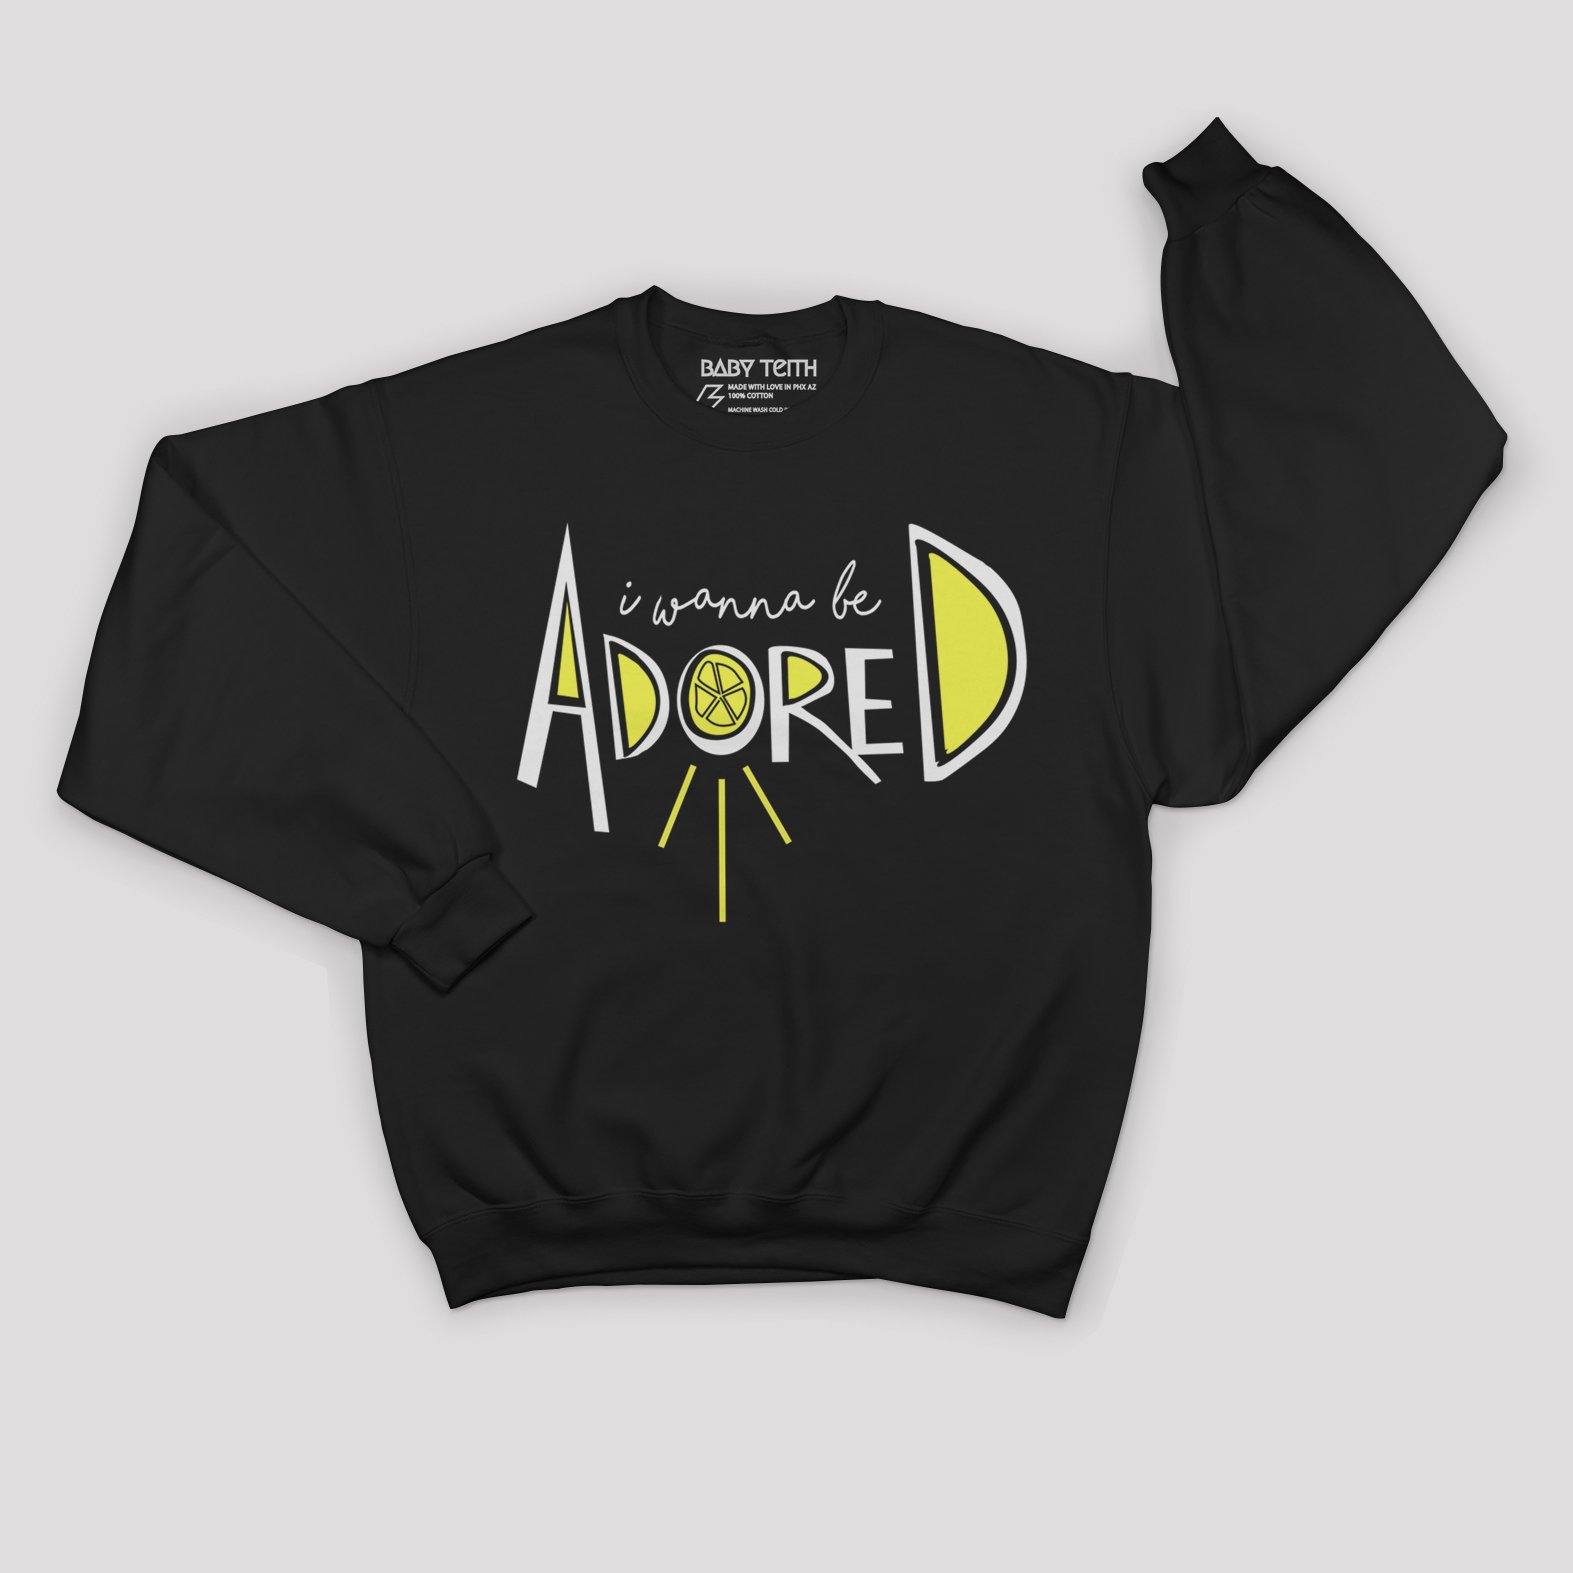 &quot;I Wanna Be Adored&quot; Sweatshirt for Kids - Baby Teith